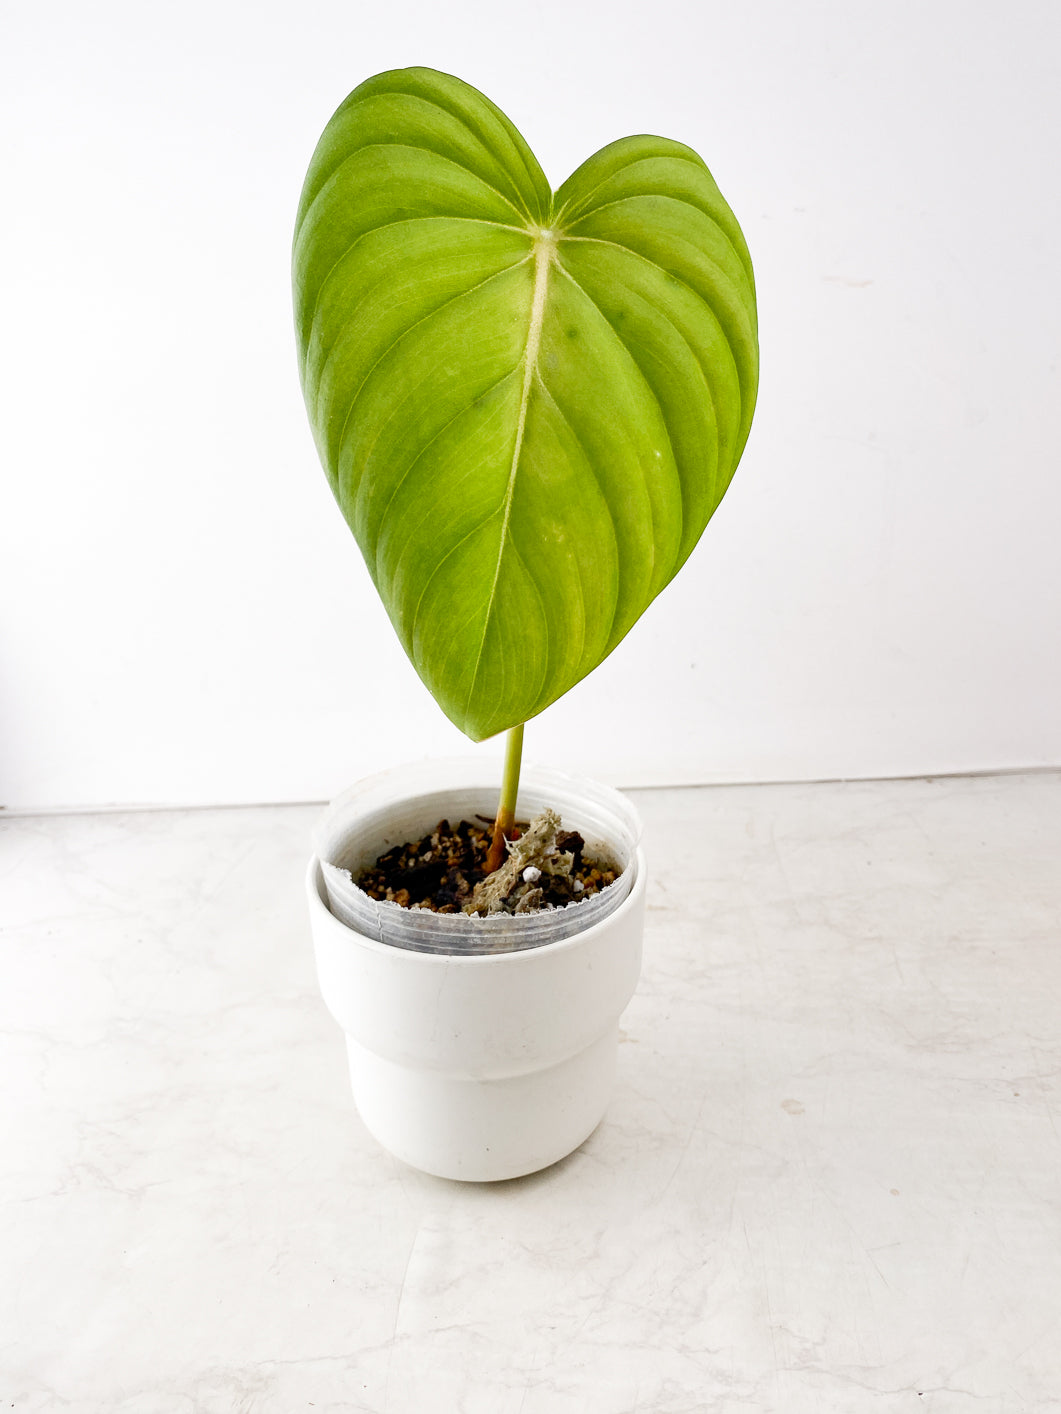 COMBO DEAL: Philodendron Pastazanum, Splendid, and White Wizard